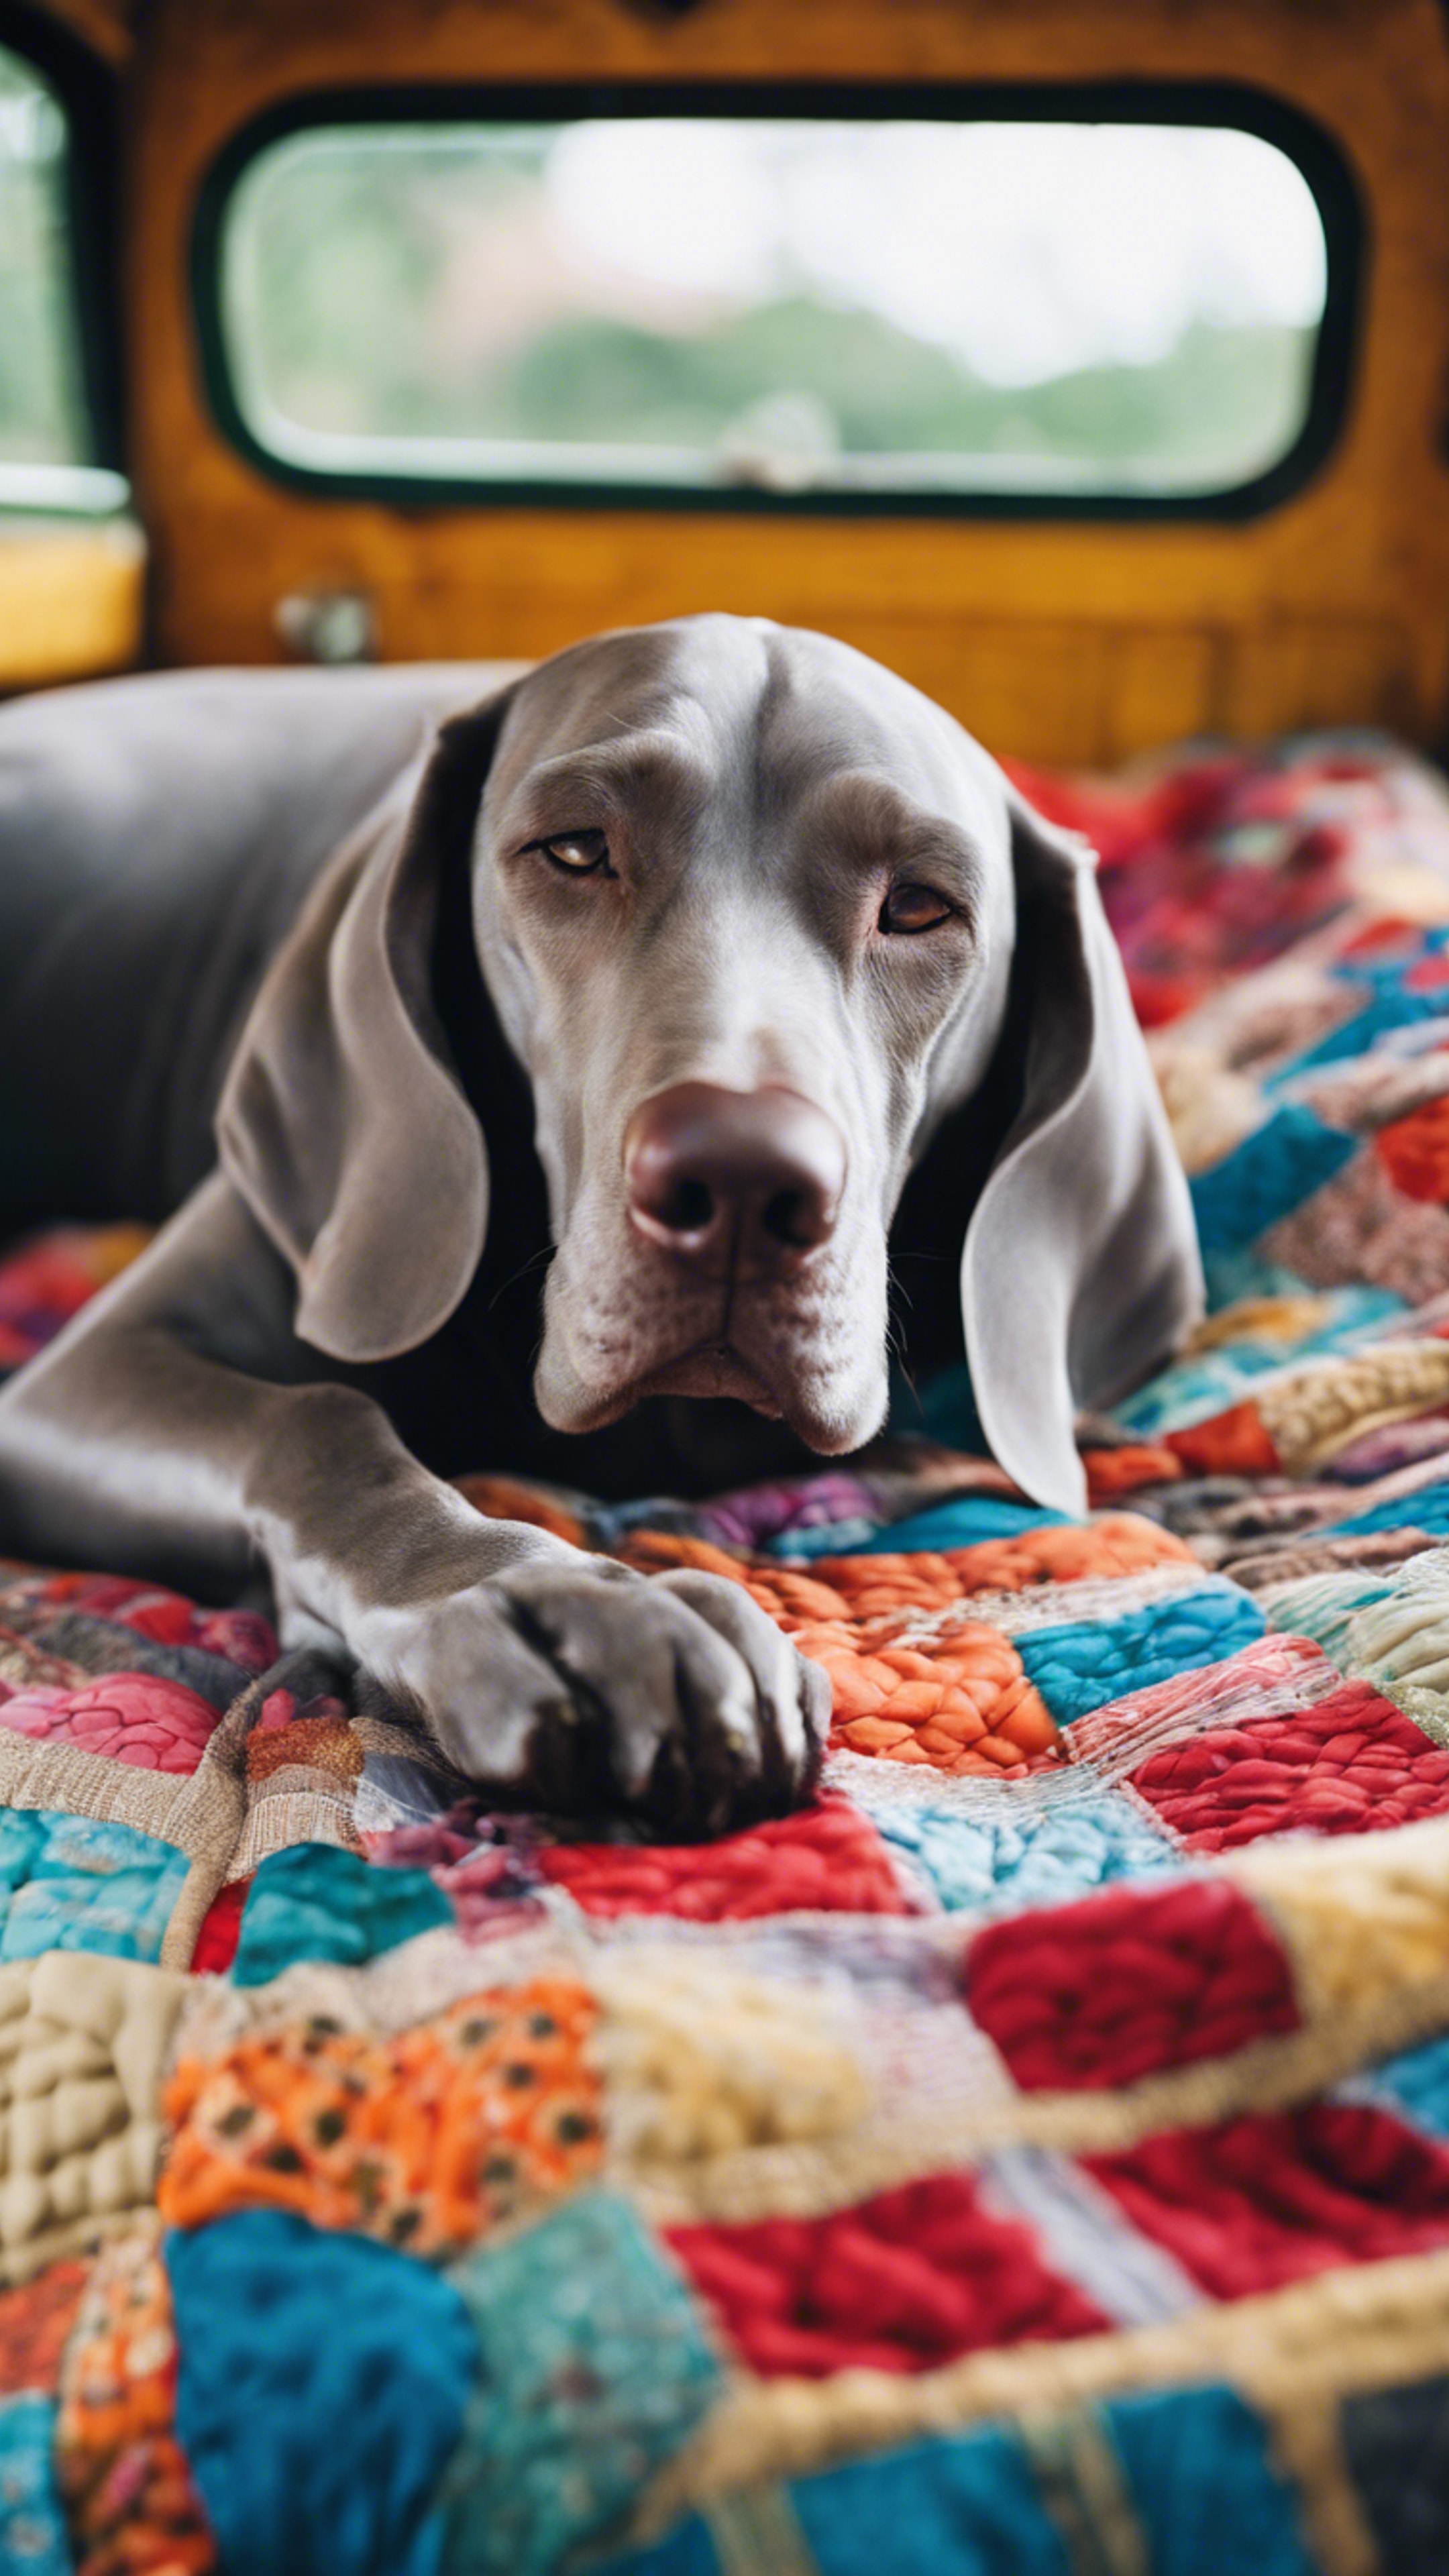 A sleepy Weimaraner lying in the back of a vintage truck bed, covered with a colorful patchwork quilt.壁紙[392368d8c78049ac8a4f]